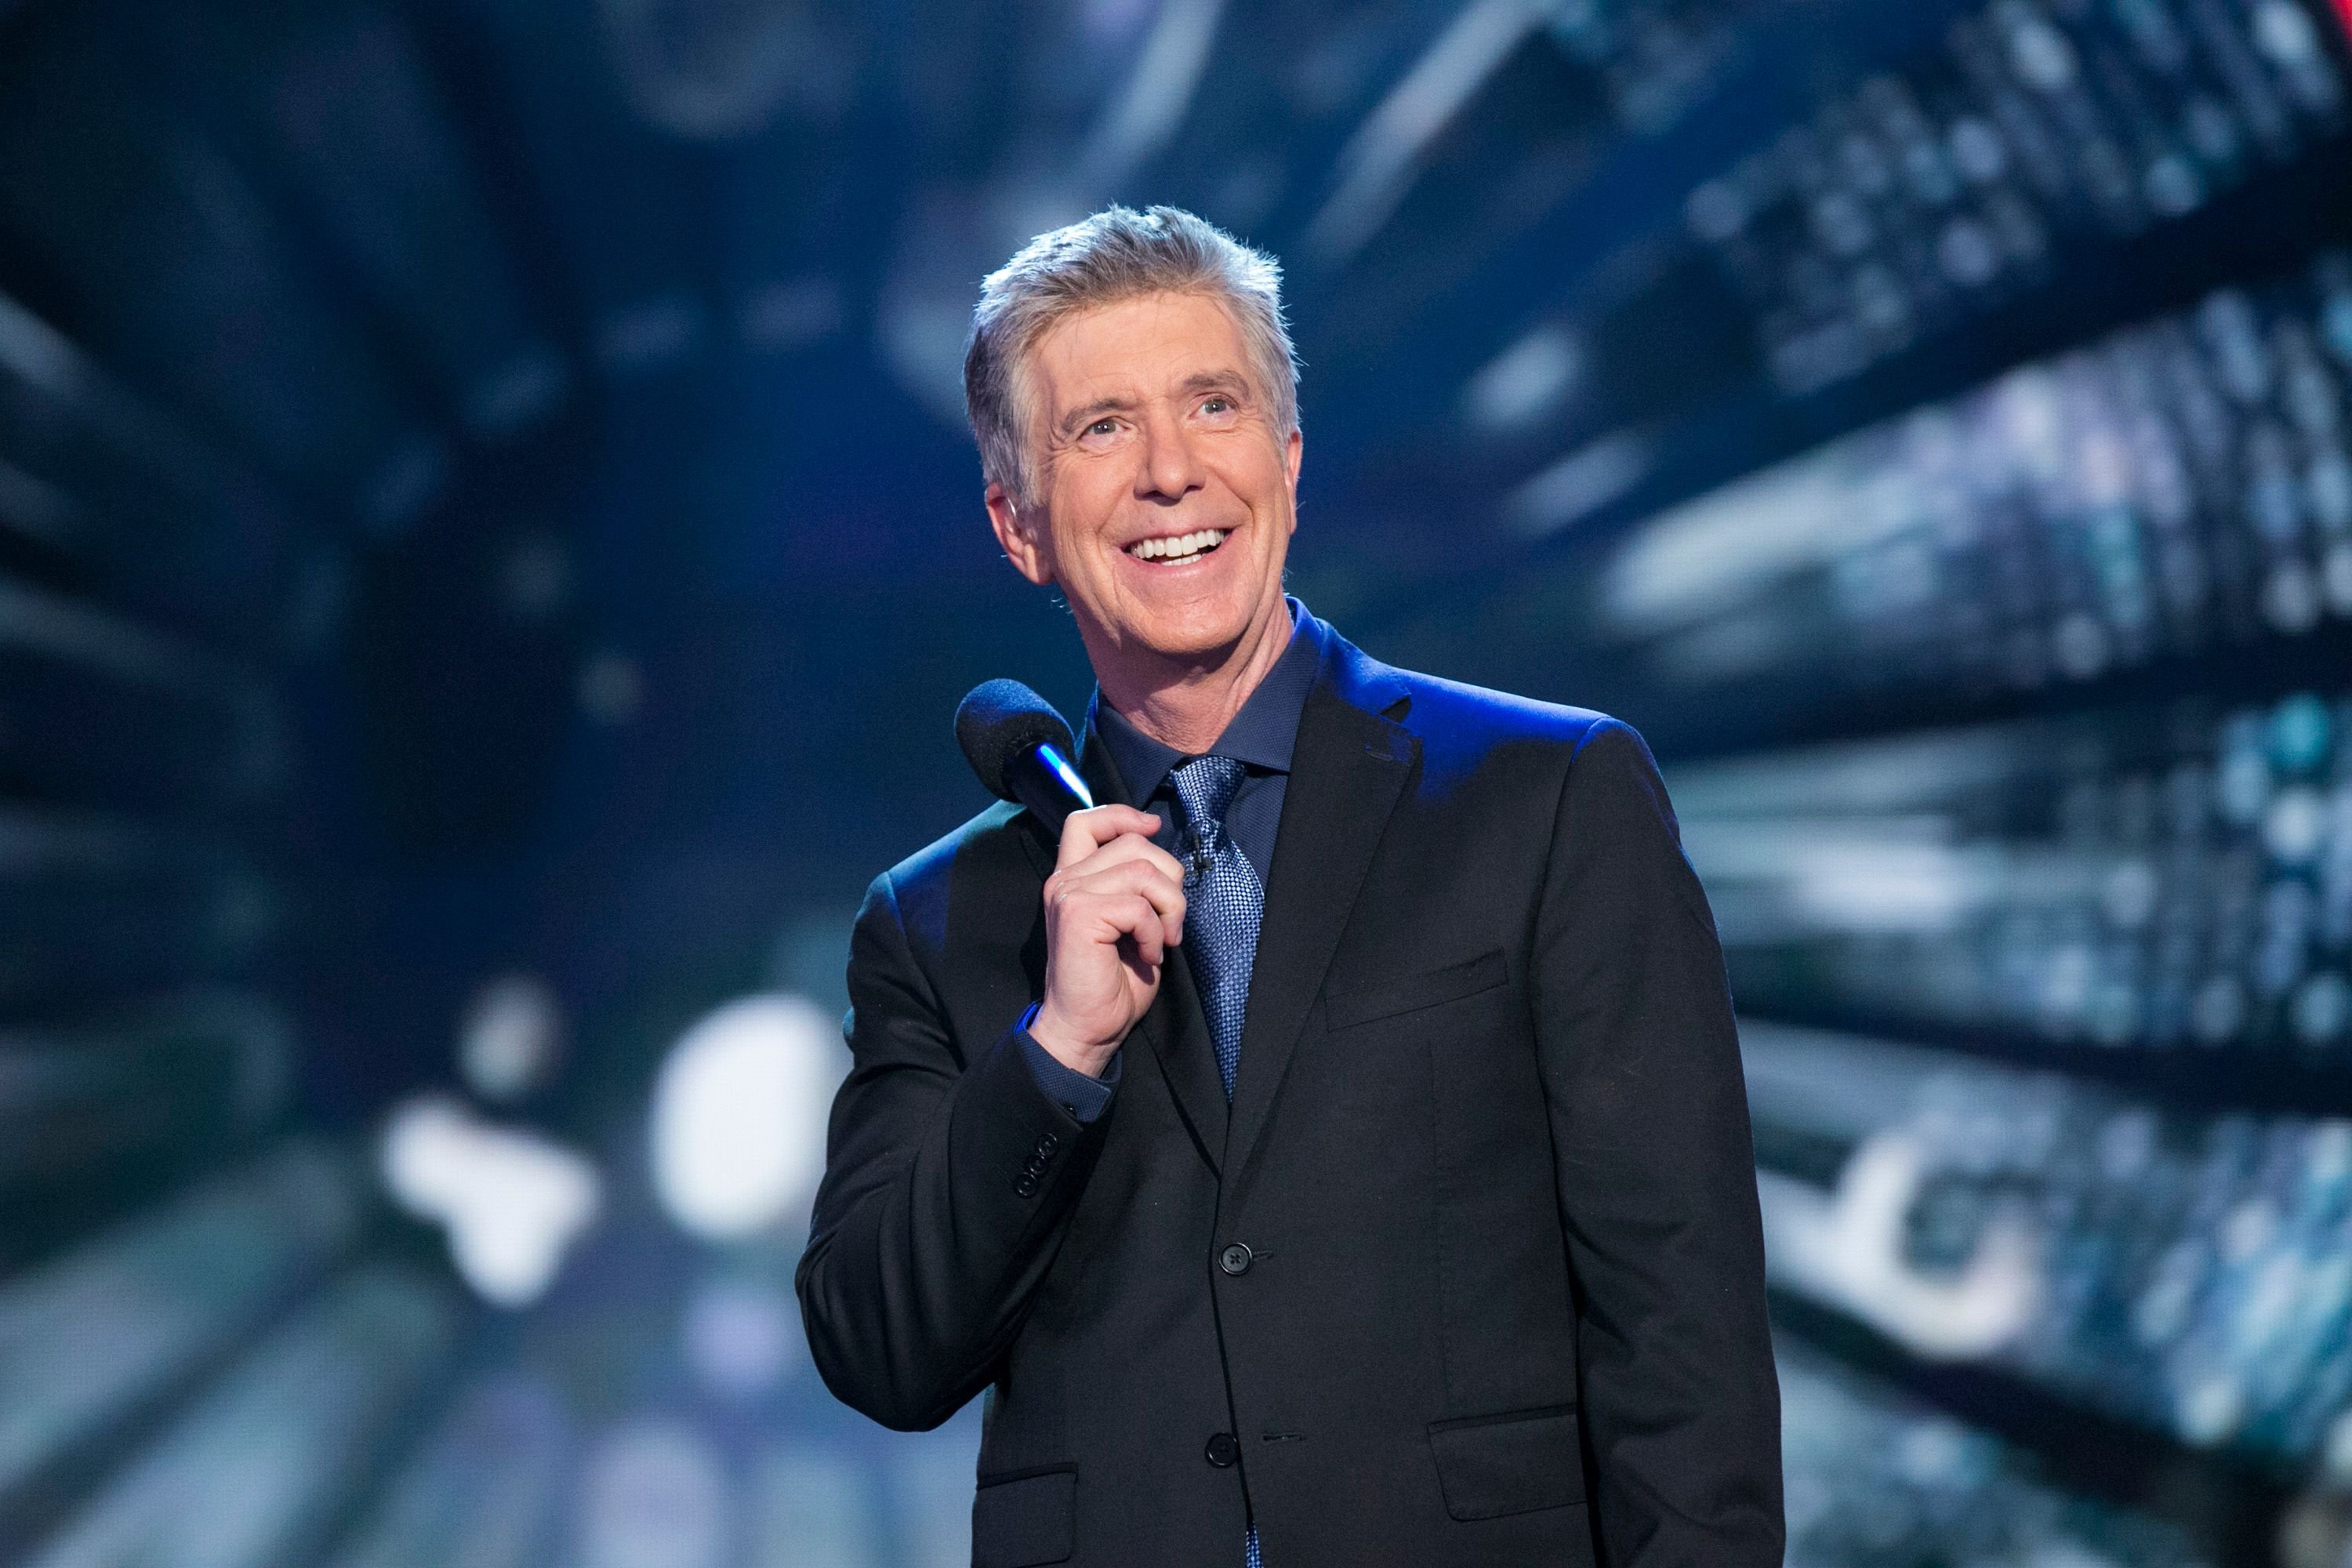 Tom Bergeron on the set of "Dancing With The Stars" in Los Angeles | Source: Getty Images